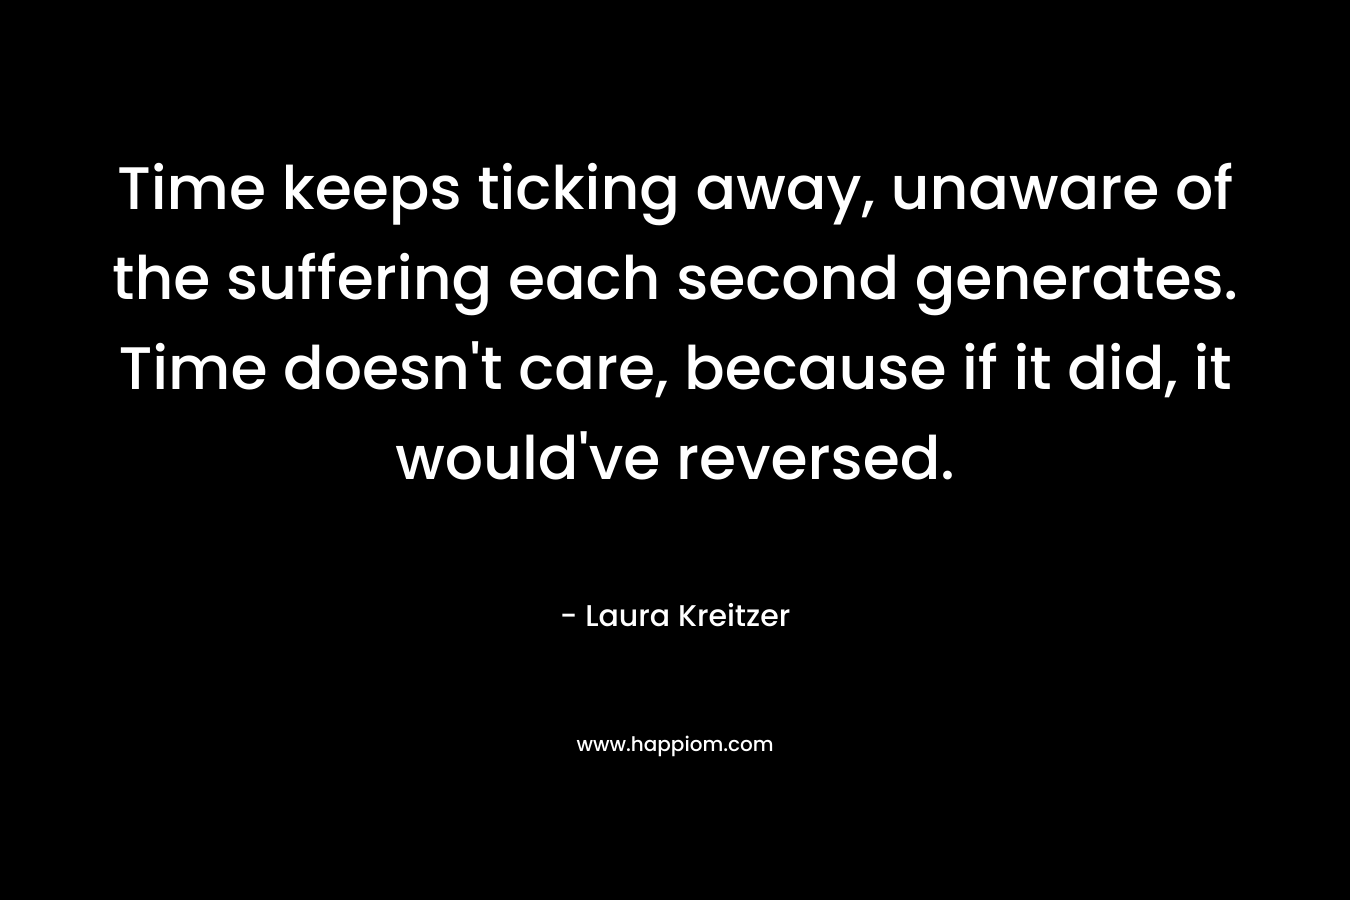 Time keeps ticking away, unaware of the suffering each second generates. Time doesn’t care, because if it did, it would’ve reversed. – Laura Kreitzer